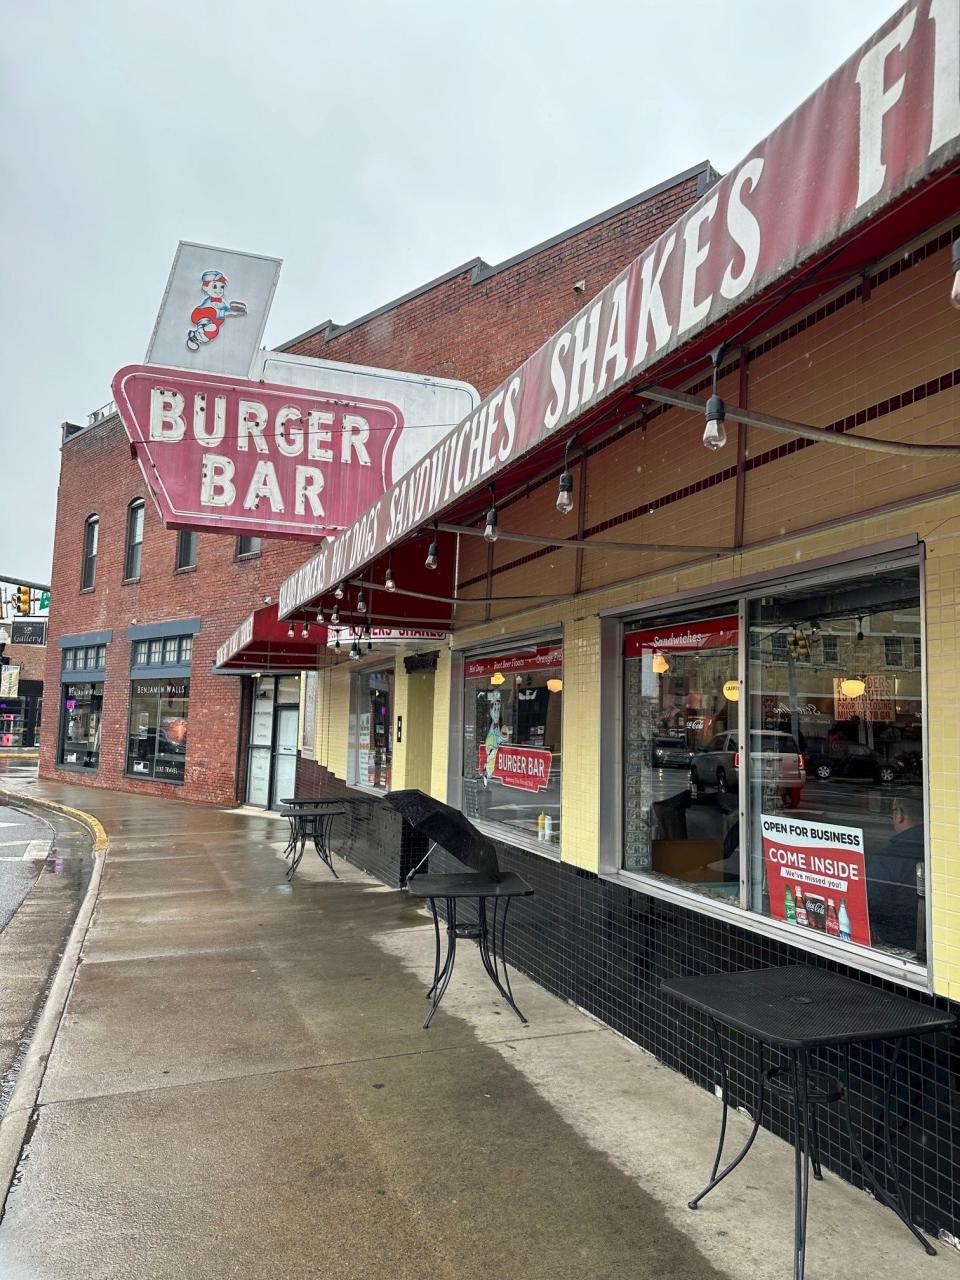 The Burger Bar in Bristol was founded in 1942 and feels like not much has changed since then. Stop in for a burger and one of dozens of milkshake flavors.